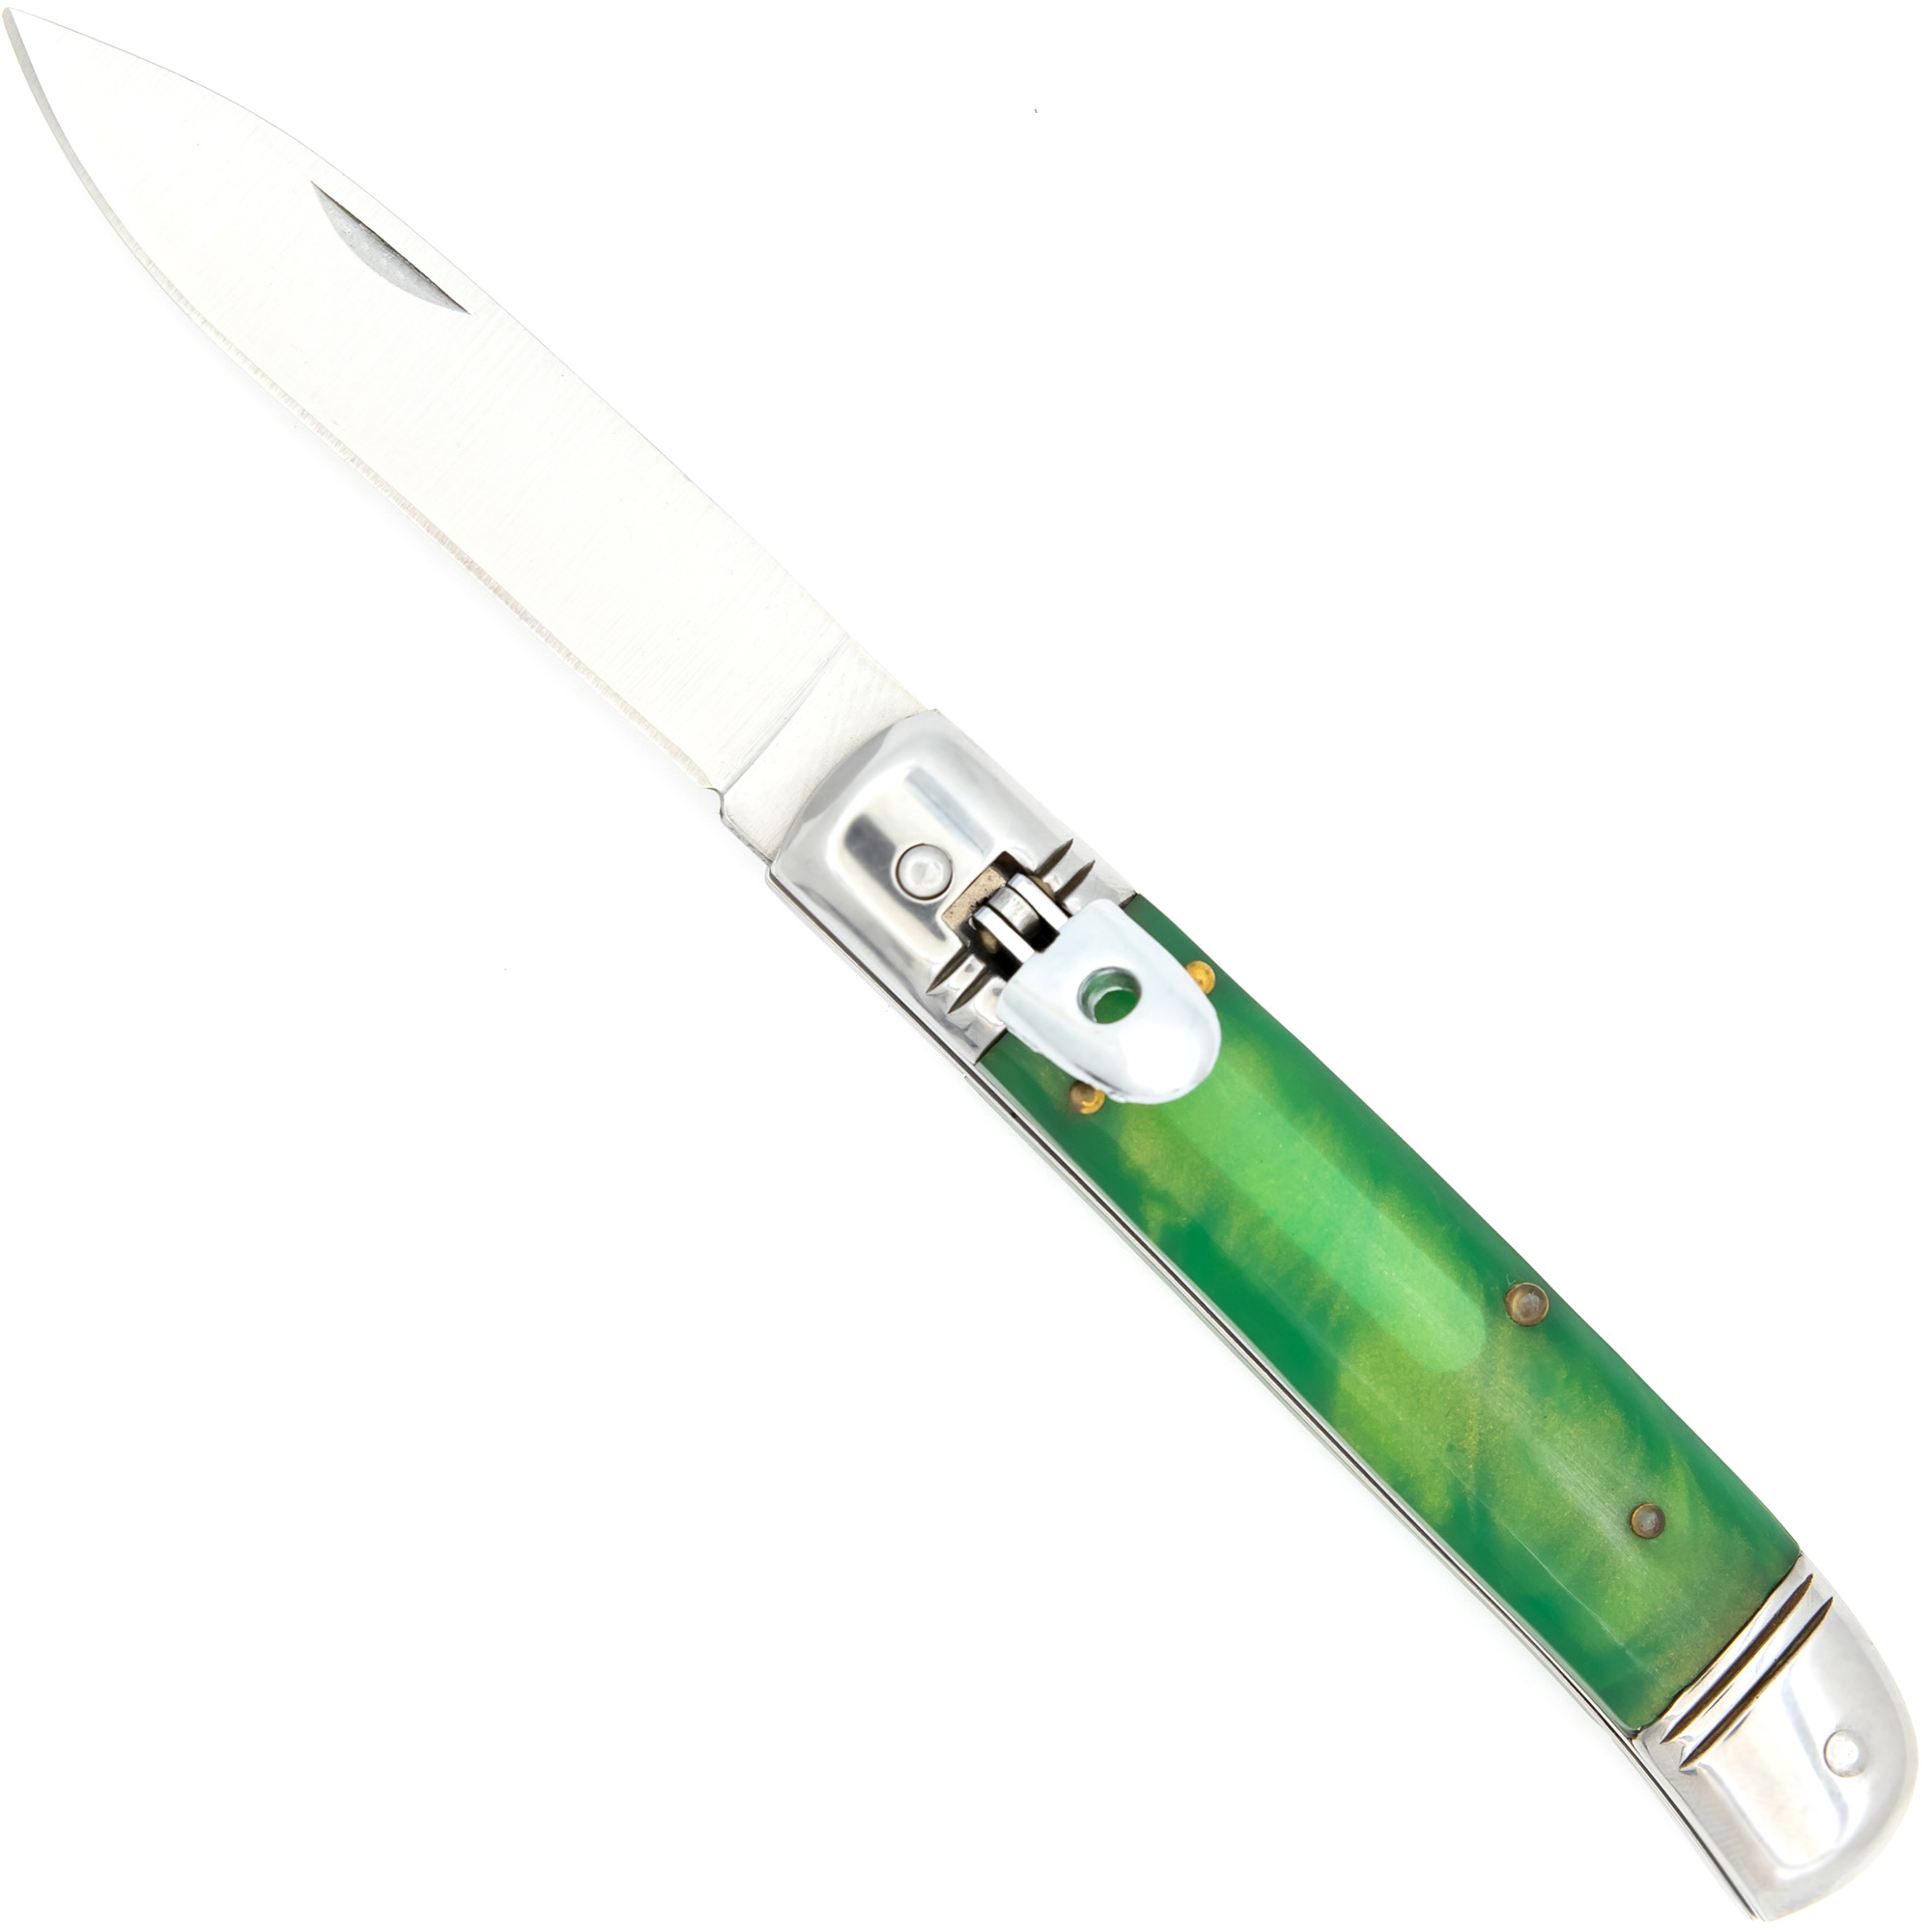 Automatic Volatile Toxin Lever Lock Knife with Translucent Green Handle